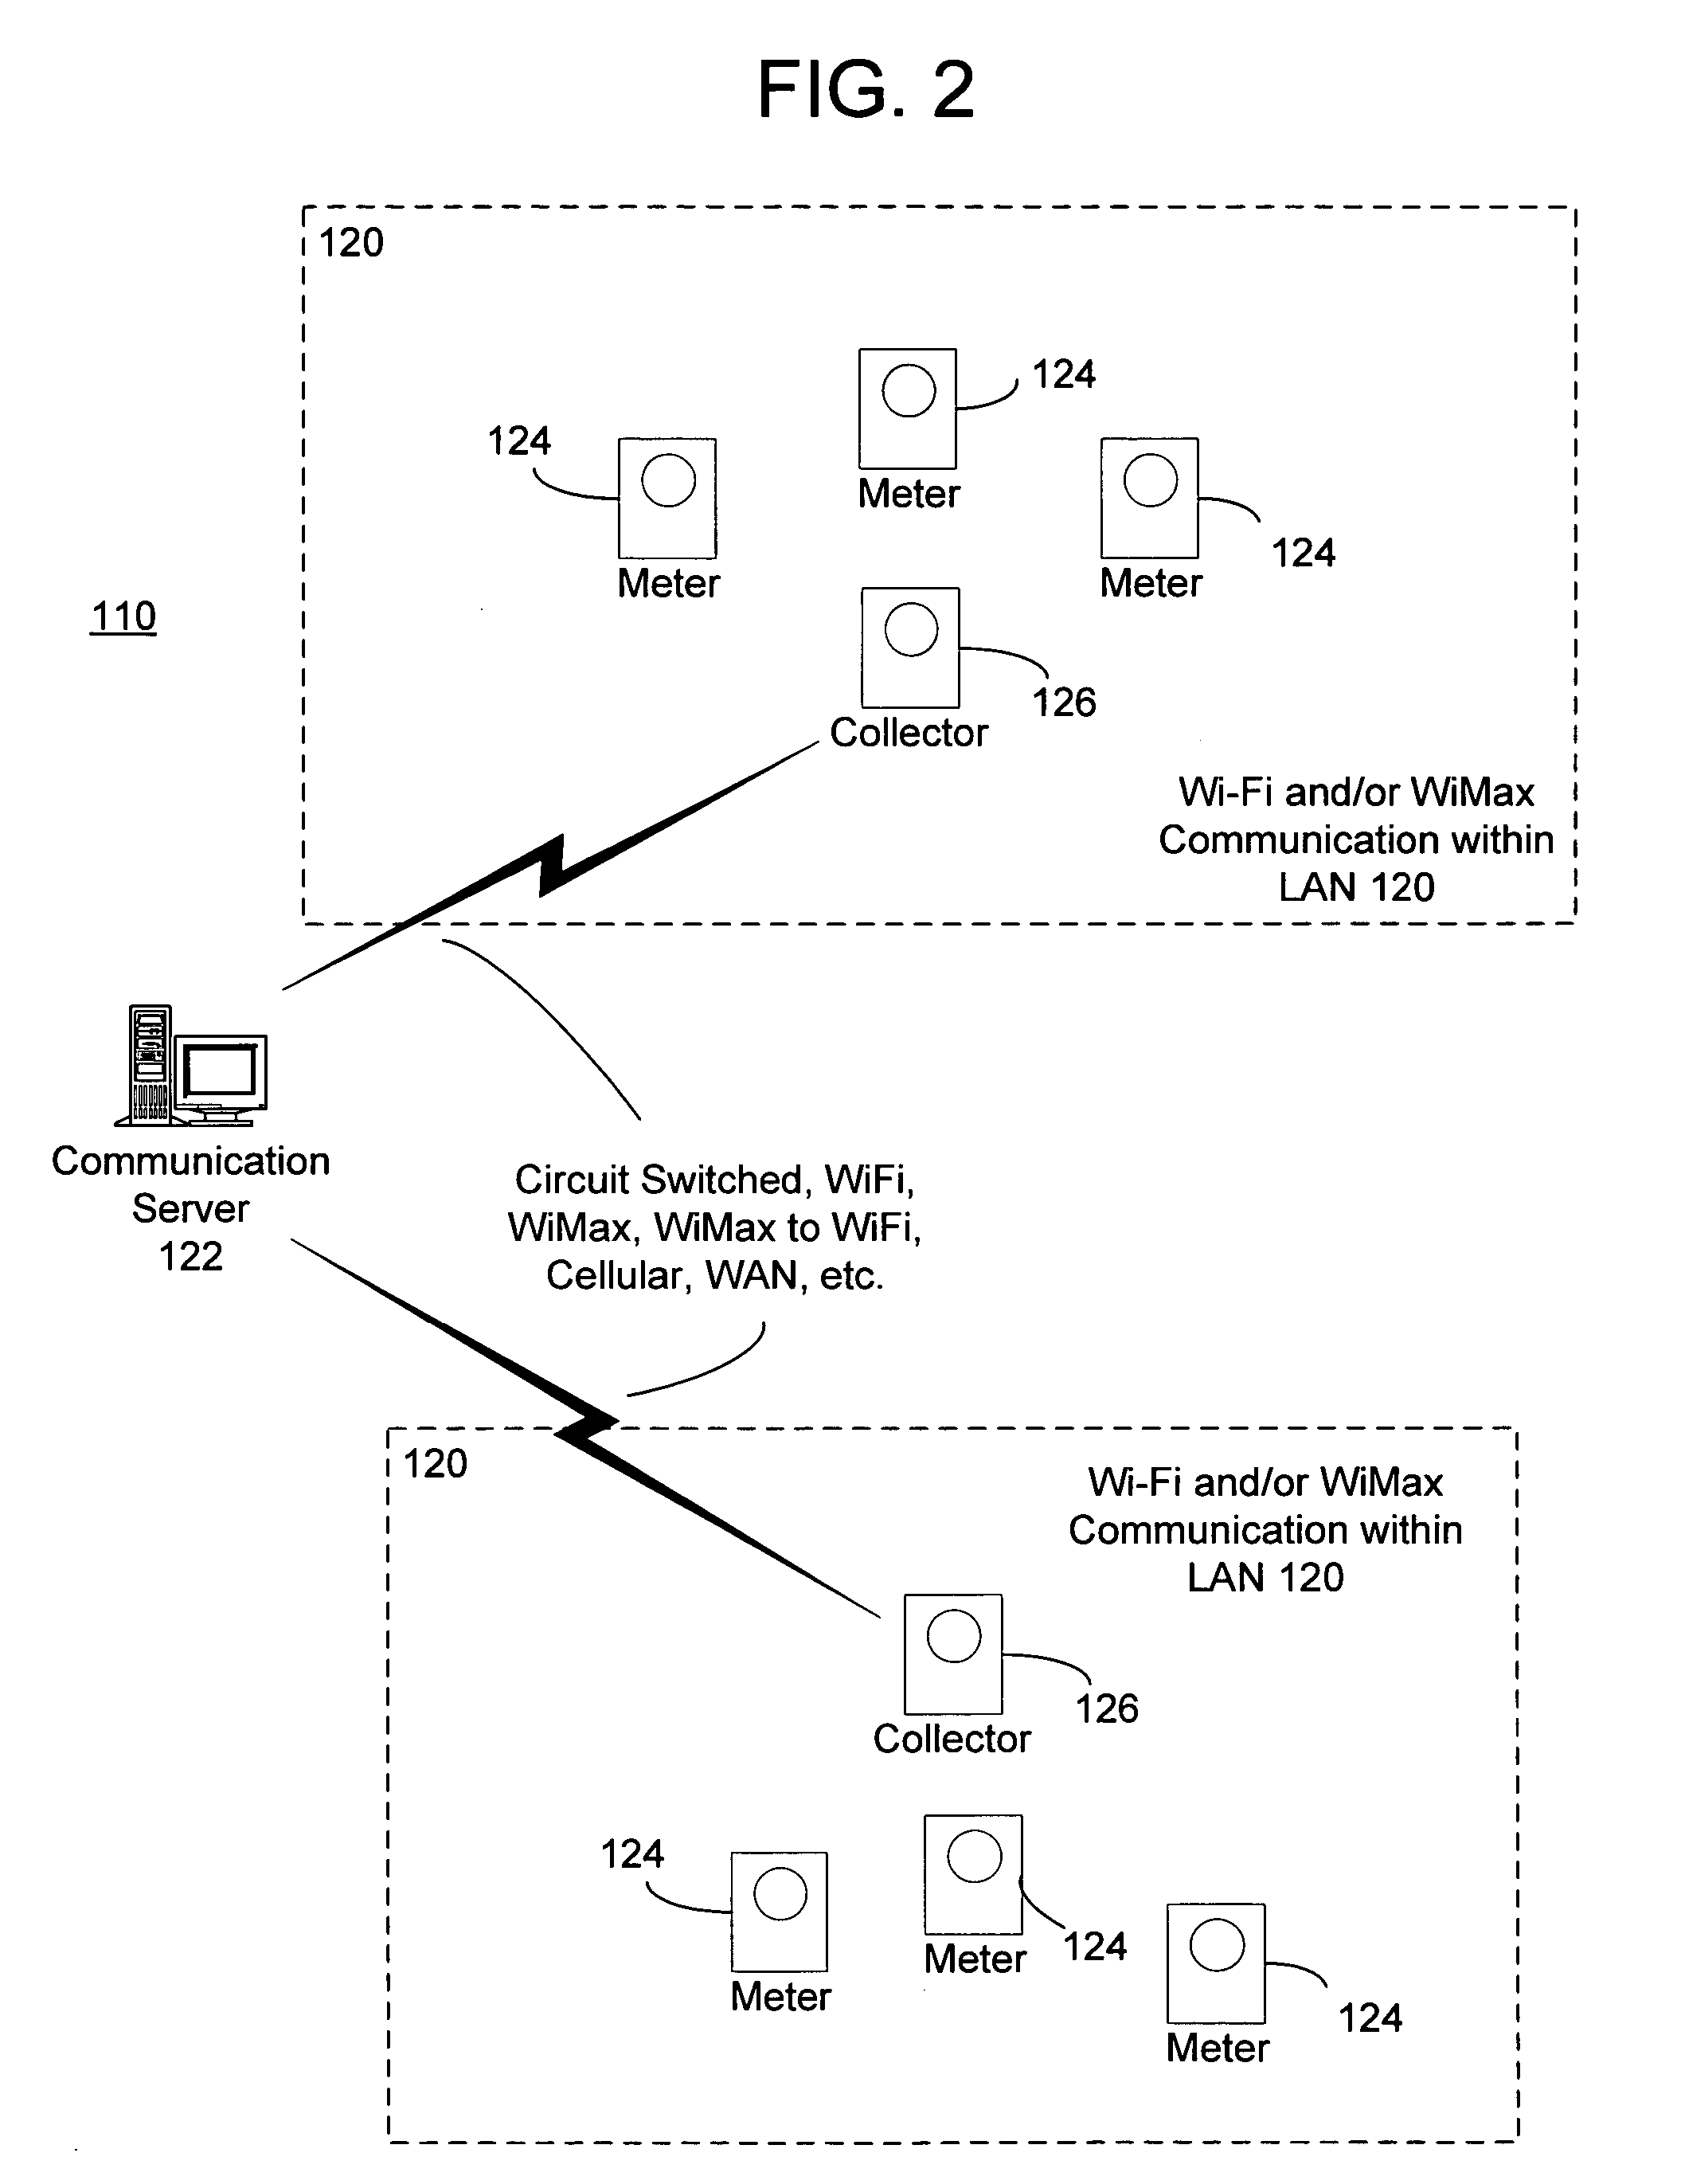 Mesh AMR network interconnecting to TCP/IP wireless mesh network